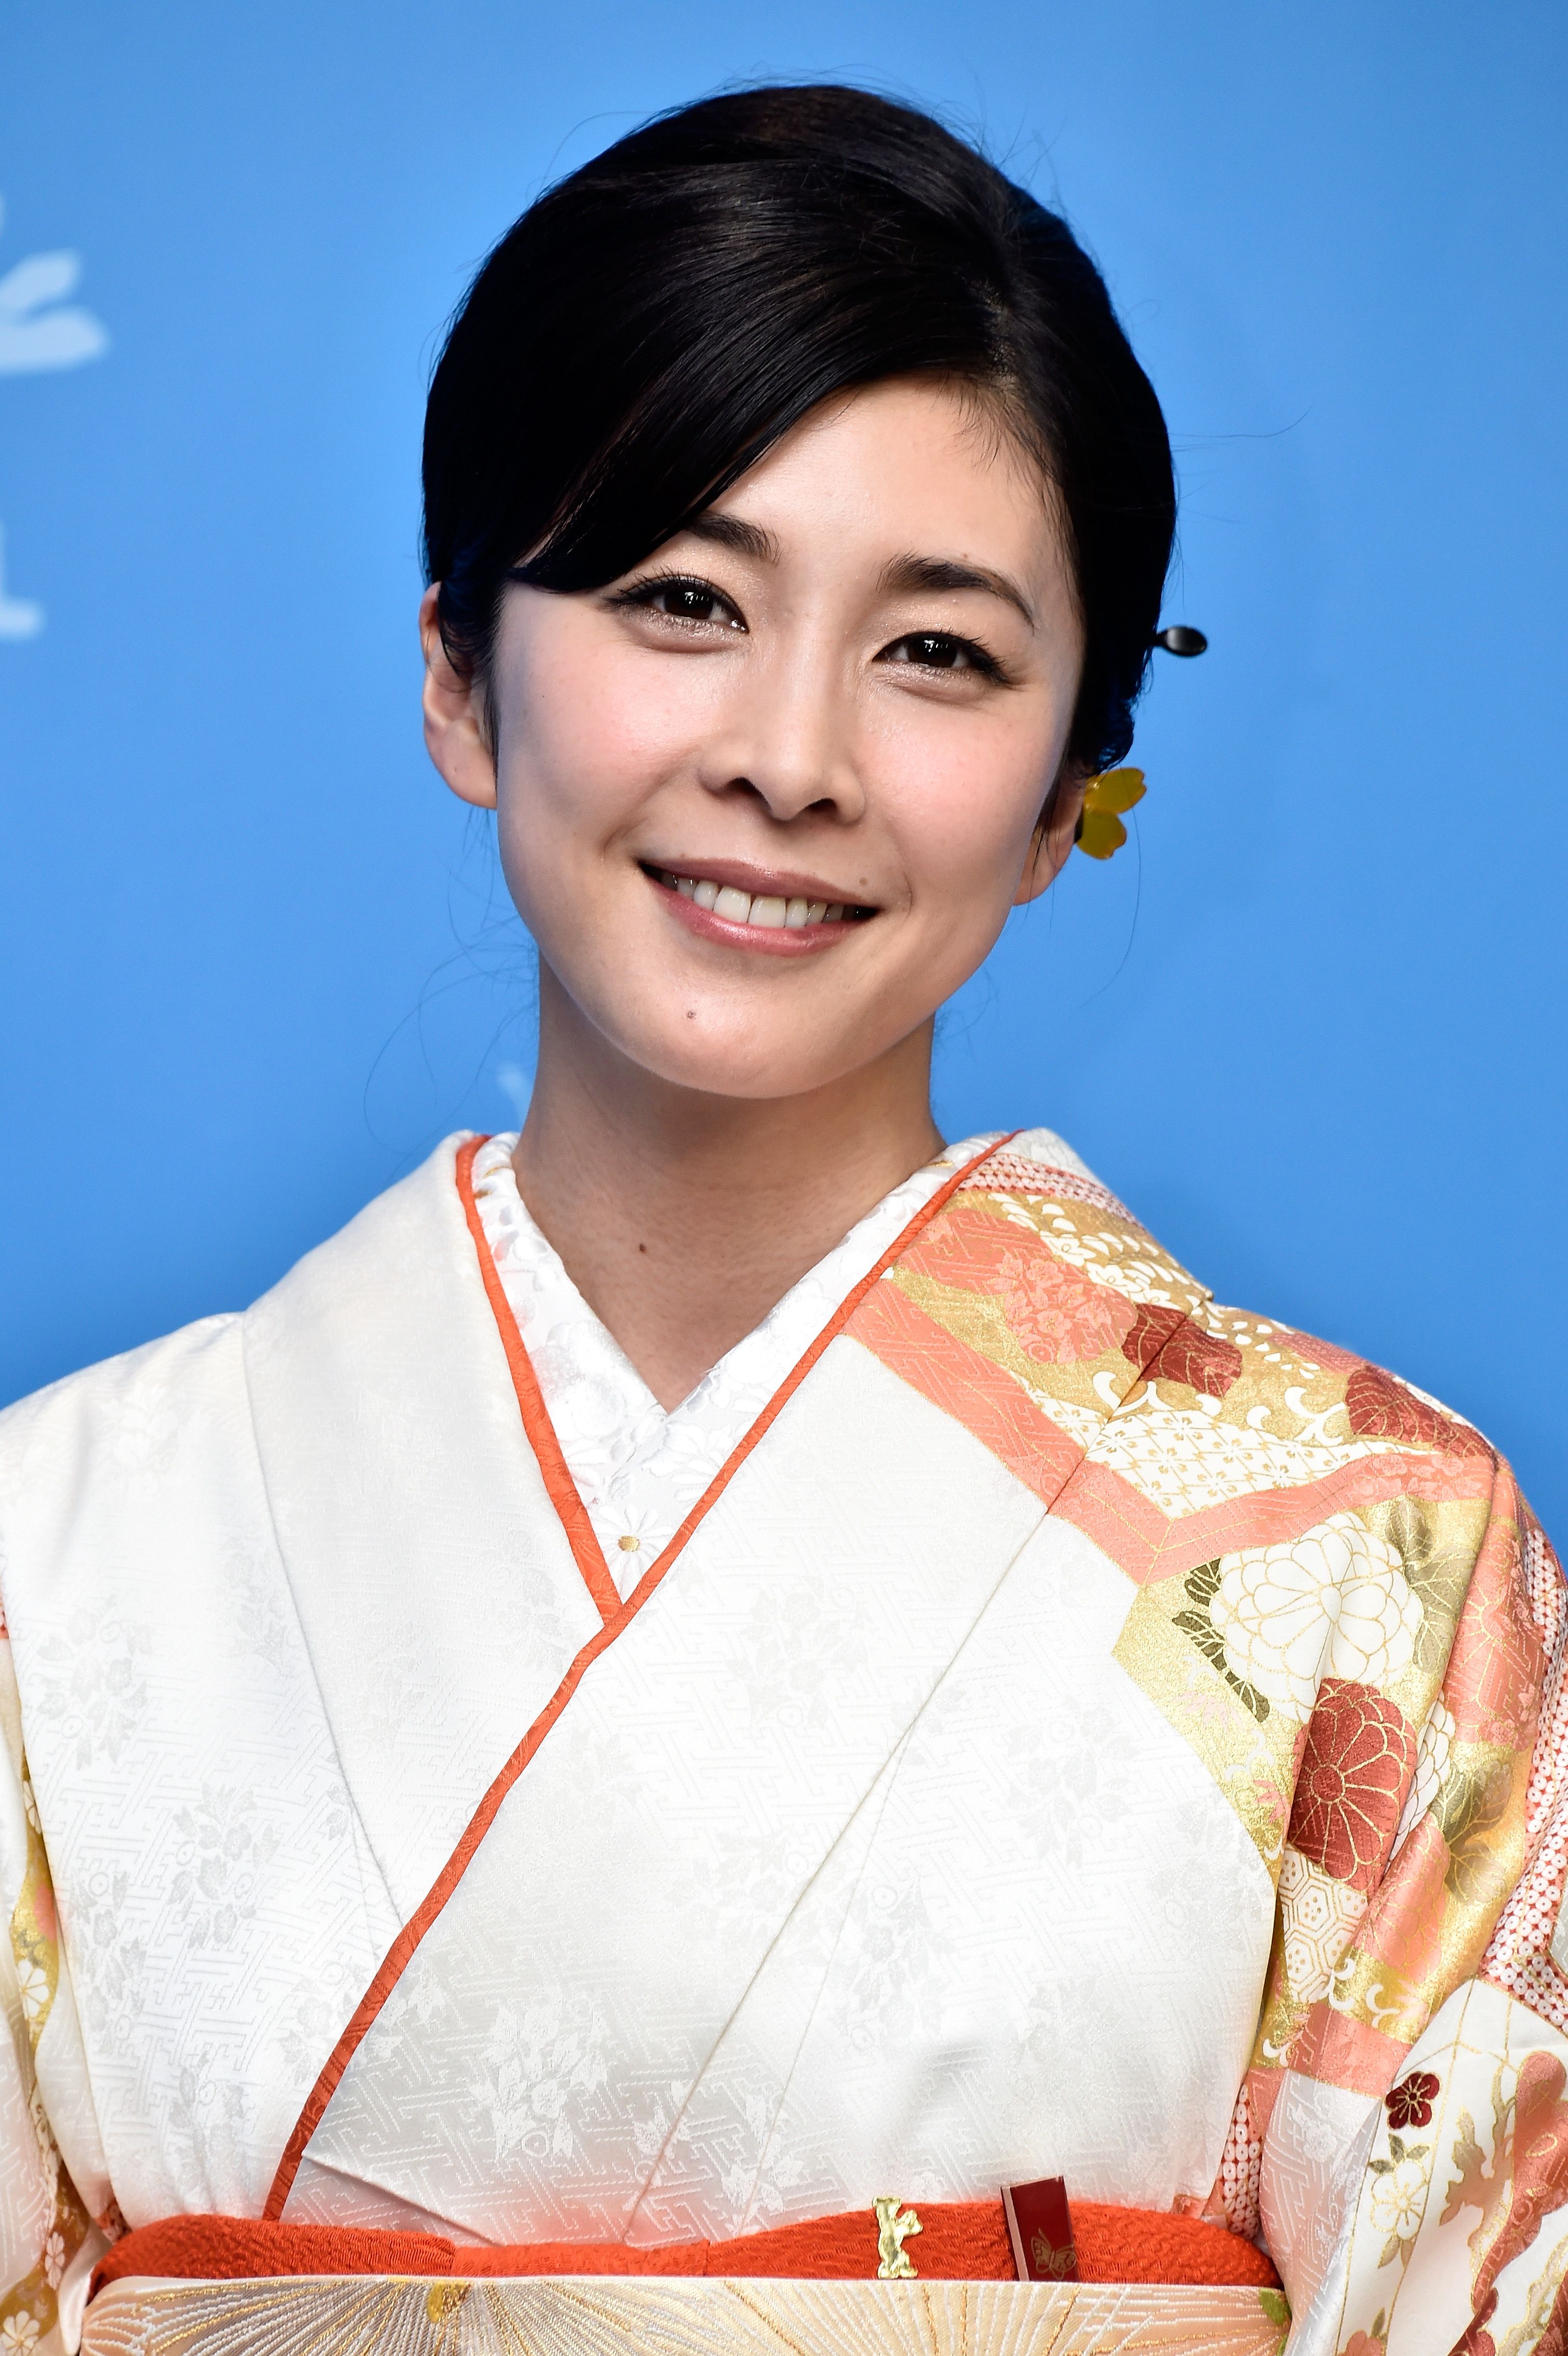 Yuko Takeuchi at the "Creepy" photo call during the 66th Berlinale International Film Festival Berlin on February 13, 2016, in Berlin, Germany | Photo: Pascal Le Segretain/Getty Images